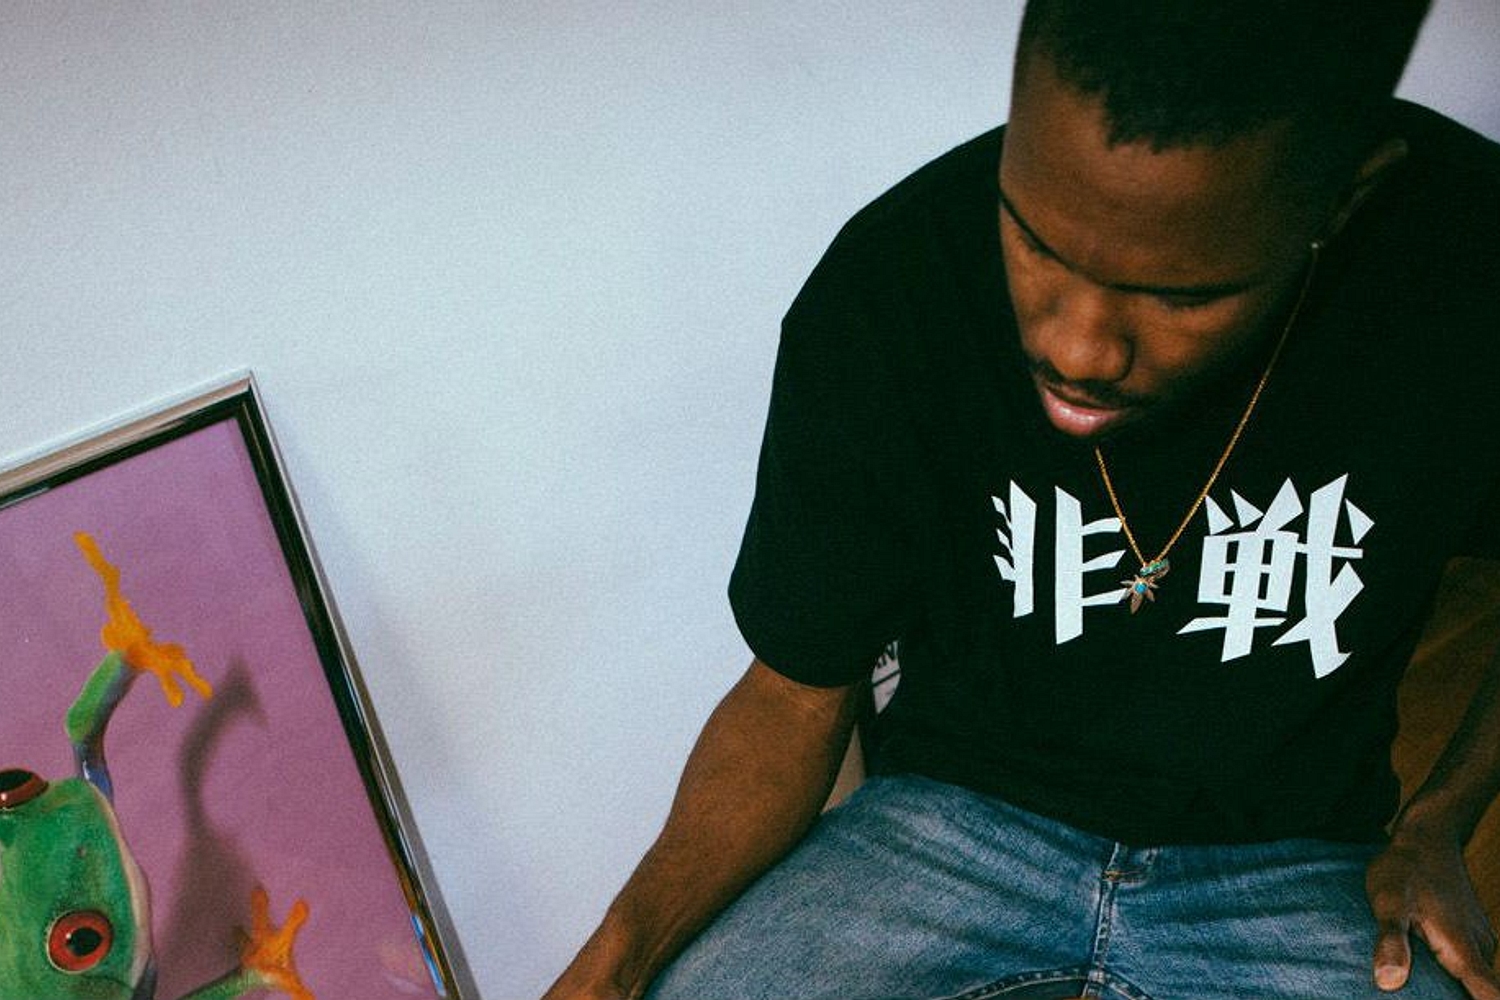 Frank Ocean and Om’Mas Keith have dropped their ‘Blonde’ lawsuits